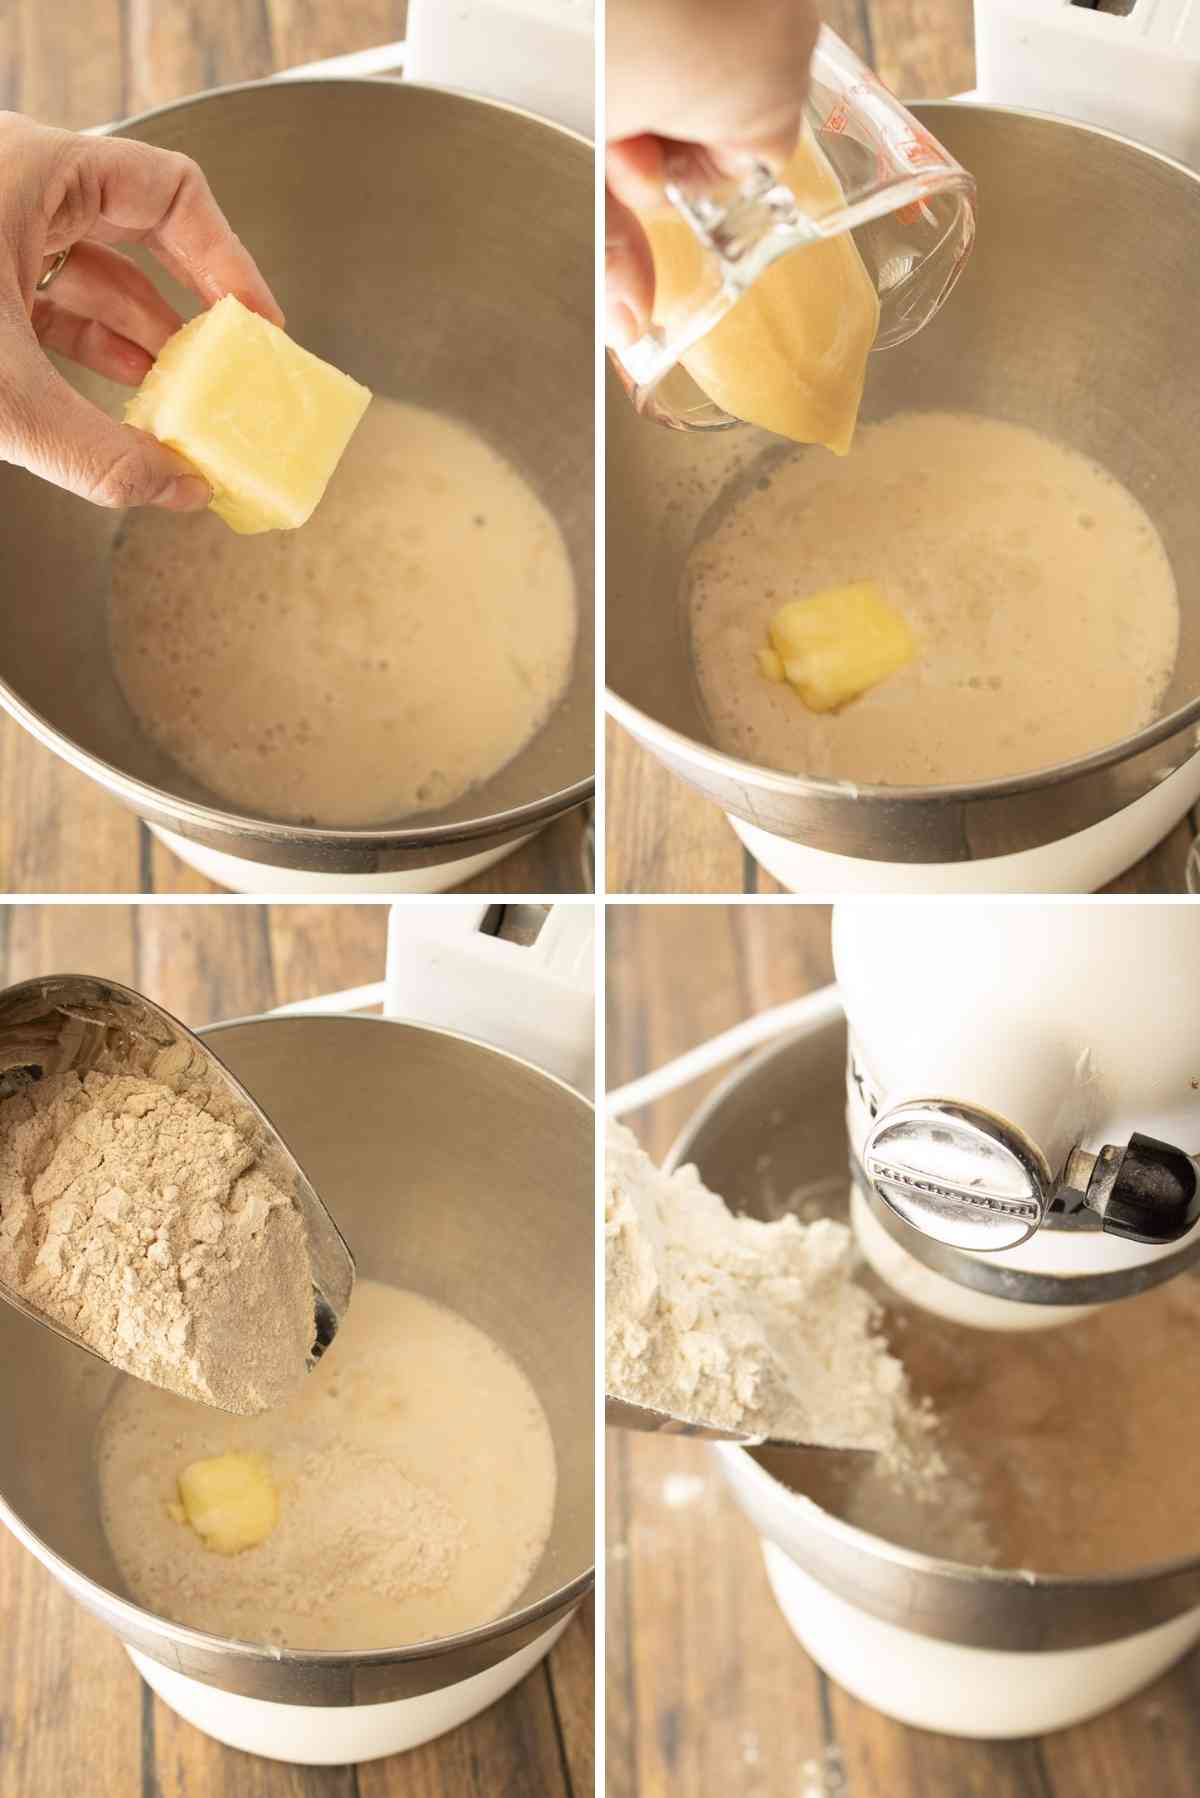 Mix in honey, butter and flour.